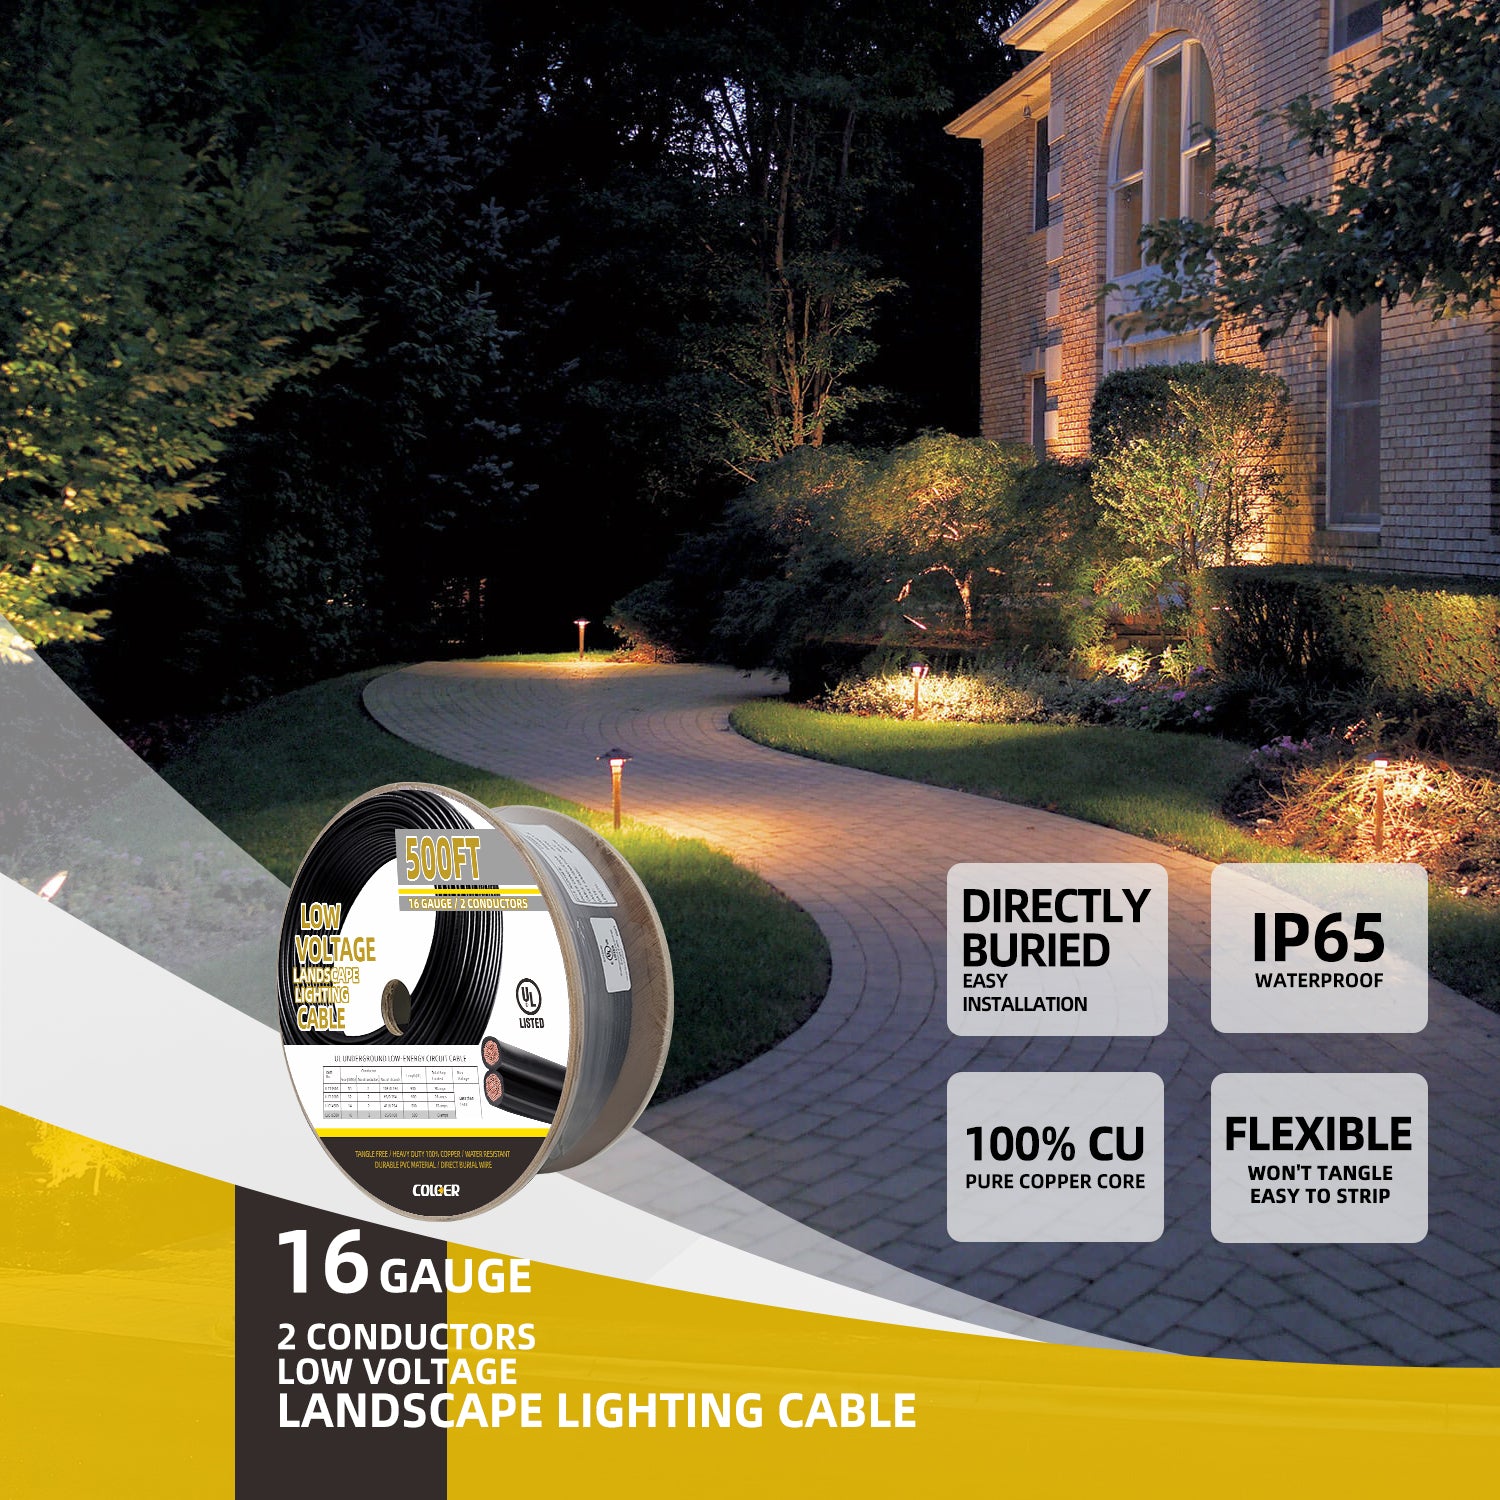 500 ft spool of COLOER 16 gauge low voltage landscape lighting cable with 2 conductors and 100% pure copper core. Background shows illuminated garden path. Key features: Directly Buried Easy Installation, IP65 Waterproof, 100% CU Pure Copper Core, Flexible Won't Tangle, Easy to Strip.